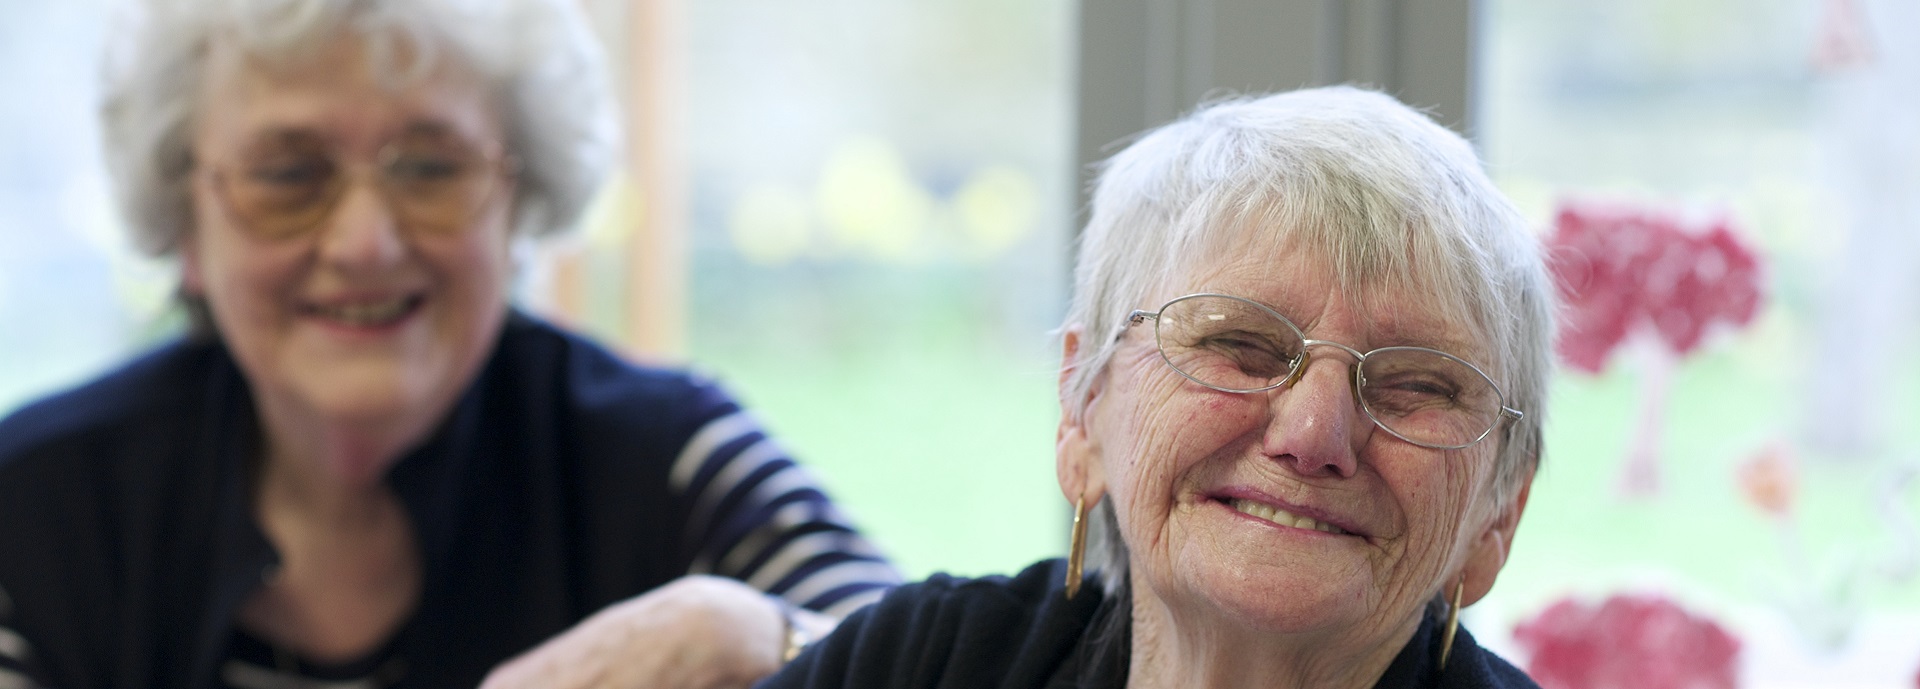 Carer and person living with dementia